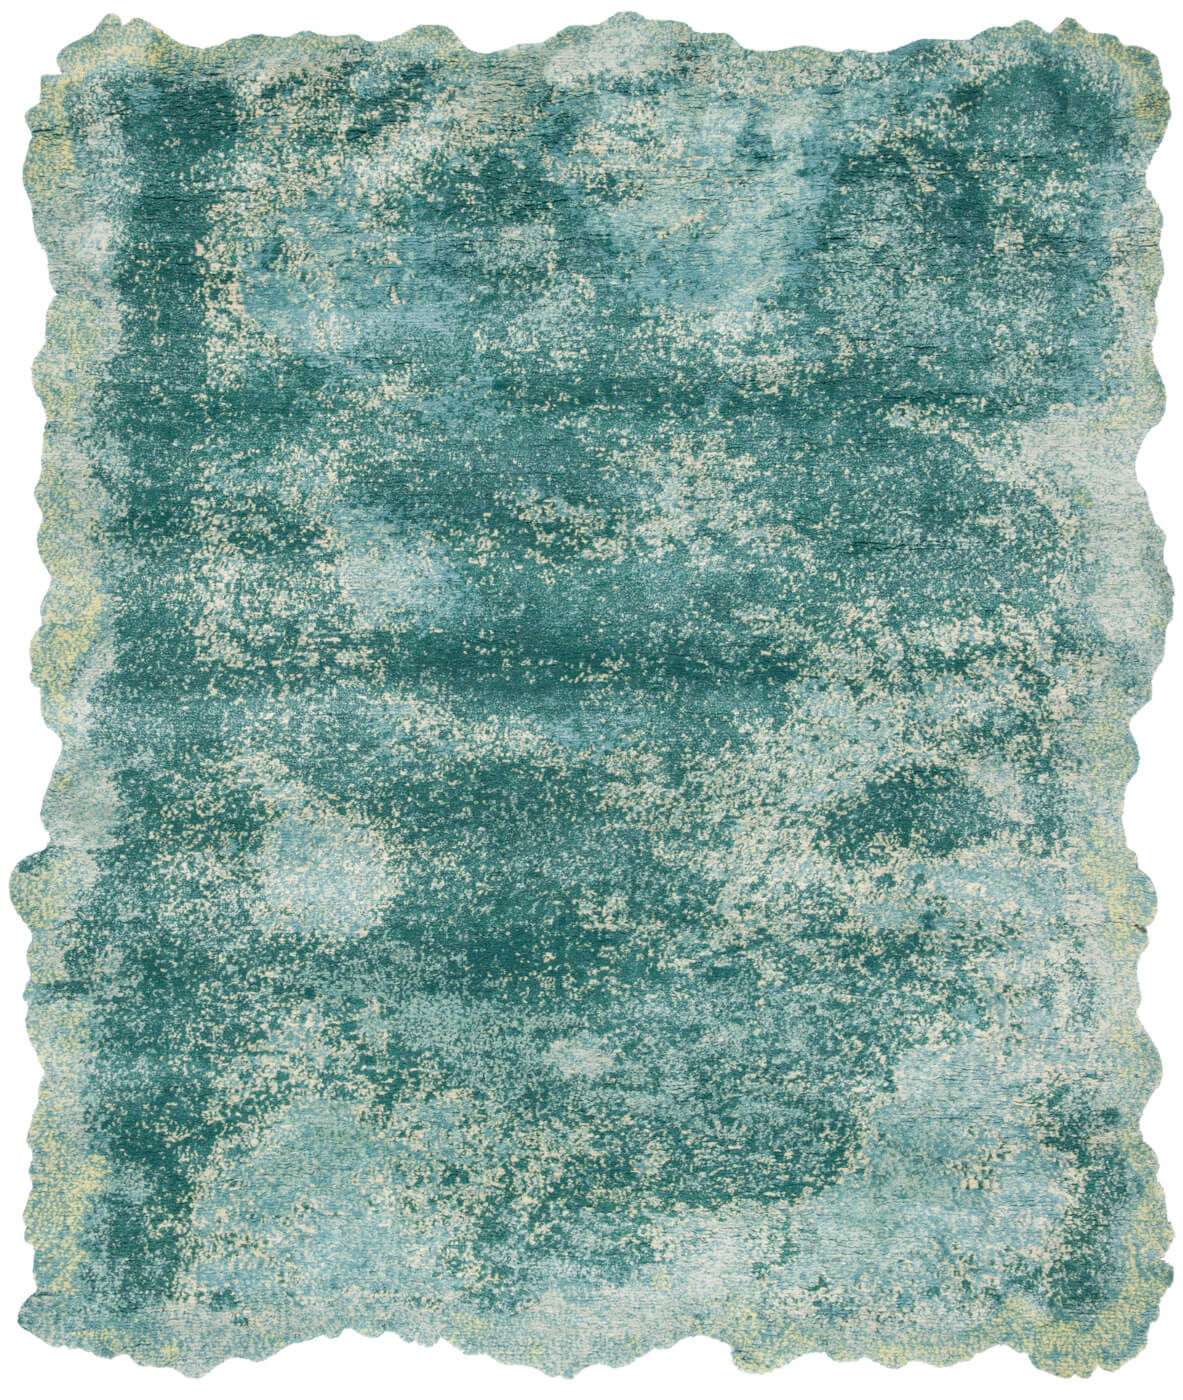 Riot Turquoise Hand-woven Luxury Rug